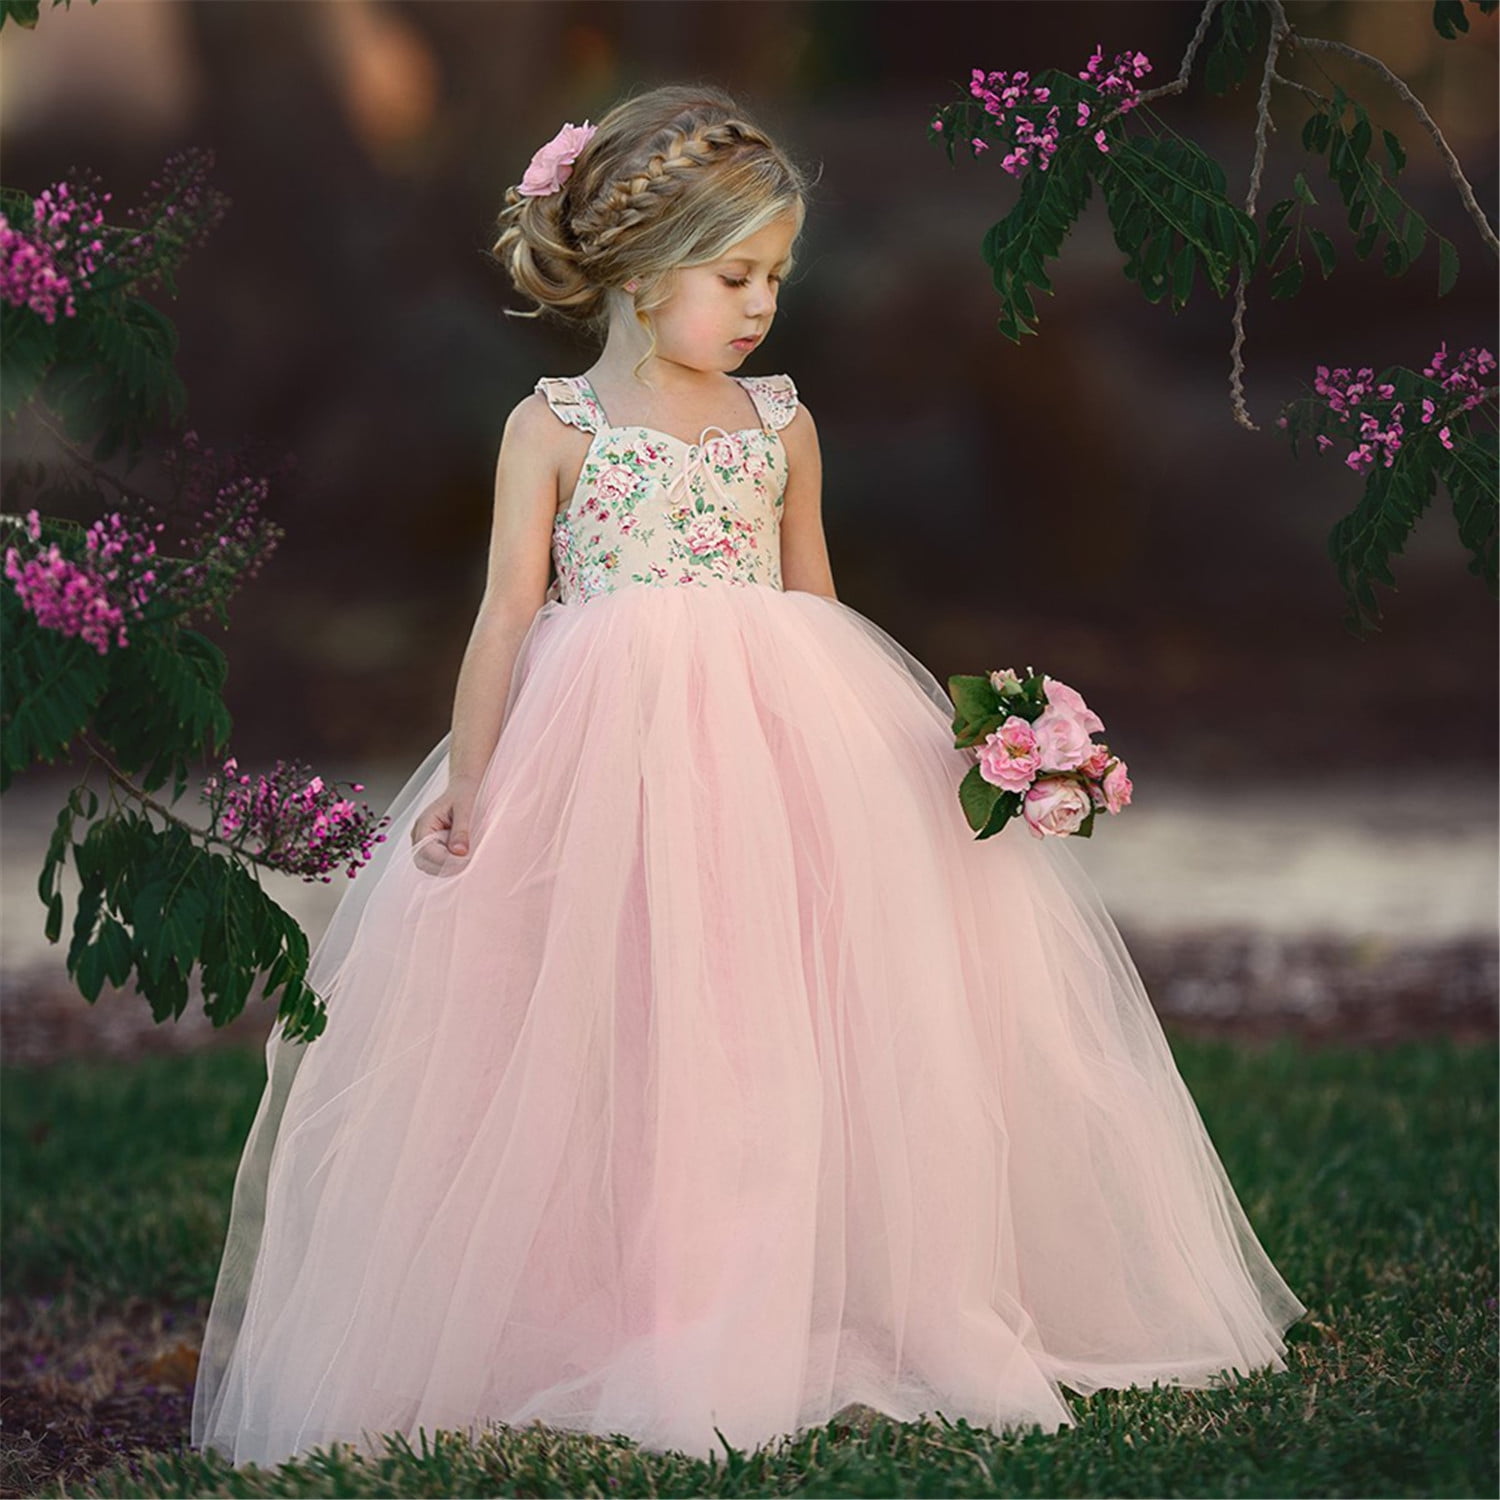 Flower Girl Dress Lace Solid Baby Princess Pageant Party Bridesmaid Dresses  Beige 5-6 Years - Walmart.com